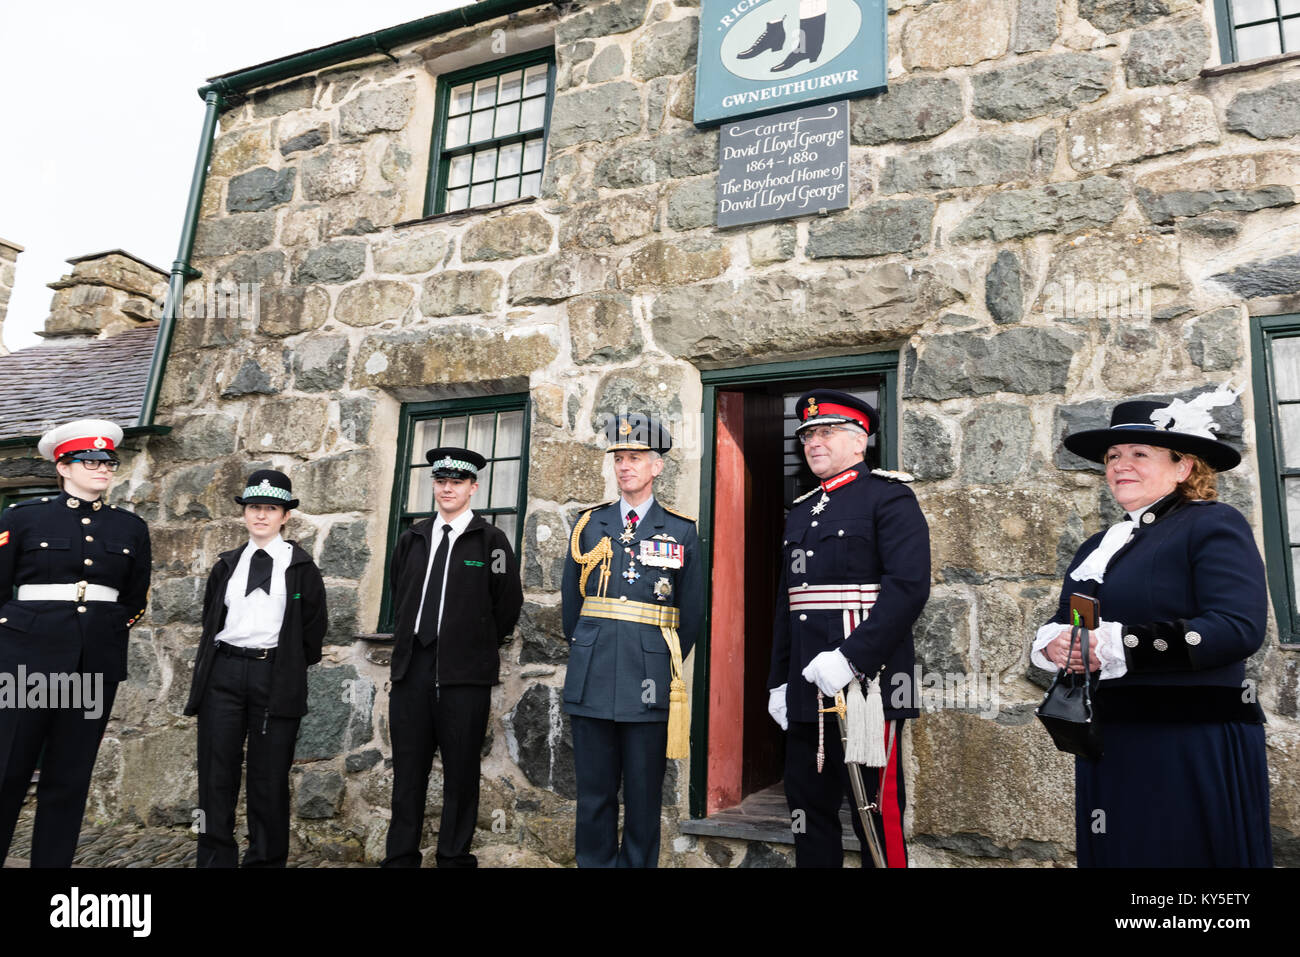 Llanystumdwy, Gwynedd, UK. 12th Jan, 2018. UK. Professor Sian Hope, High Sheriff of gwynedd (far R), Edmund Bailey, Lord Lieutenant of Gwynedd (R), Sir Stephen Hillier, Chief of Air Staff (C) and 3 cadets (L), outside Lloyd George's childhood home, following their visit as part of the commemoration of Prime Minister David Lloyd George's 1917 decision to create the world's first independent Air Force in 1918, witha visit . Credit: Michael Gibson/Alamy Live News Stock Photo